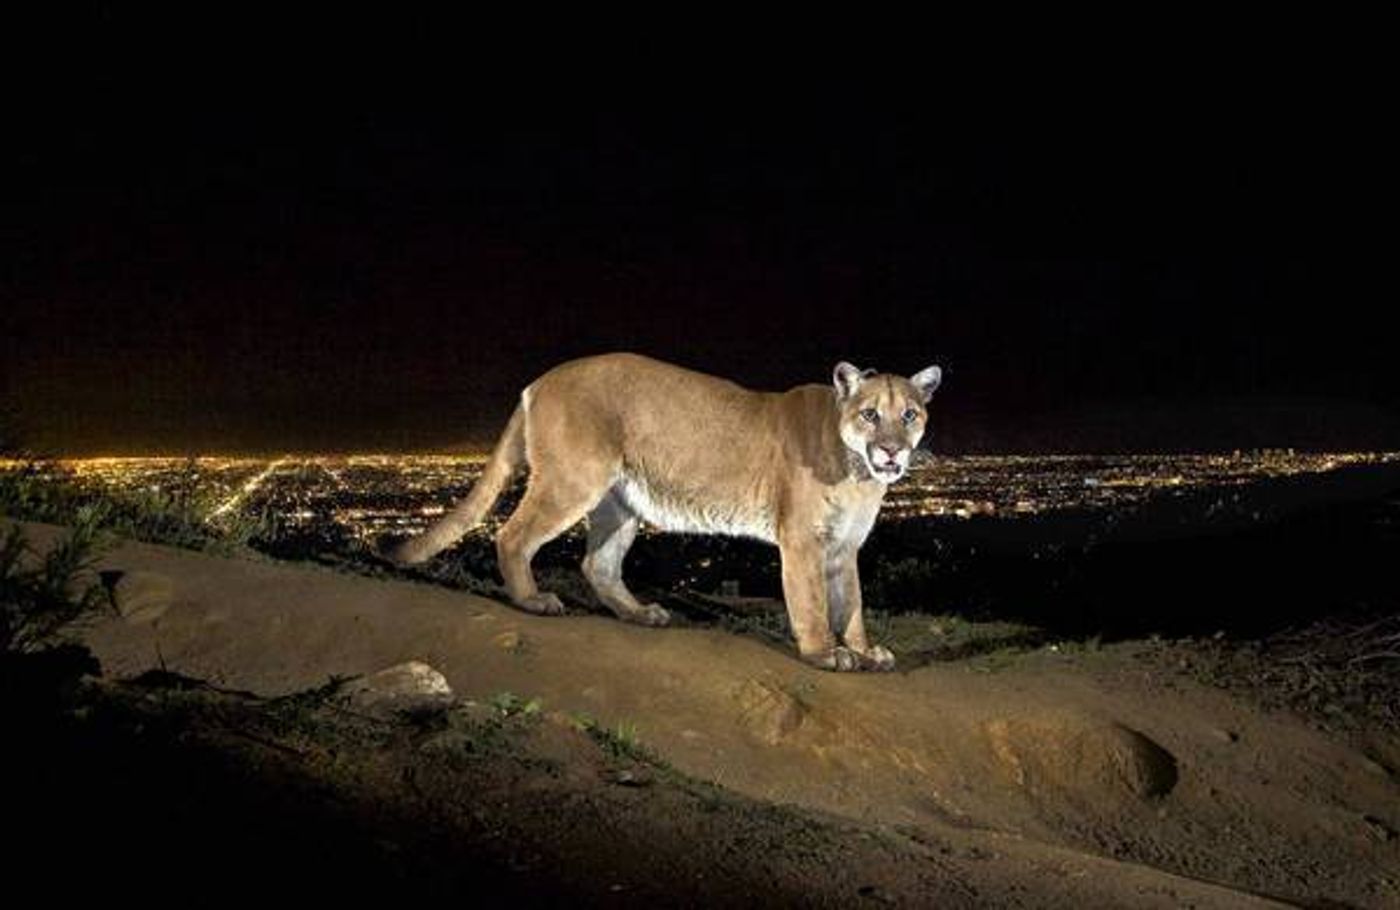 P-22, a mountain lion well-known around the Griffith Park area, is thought to be behind the vicious mauling. 